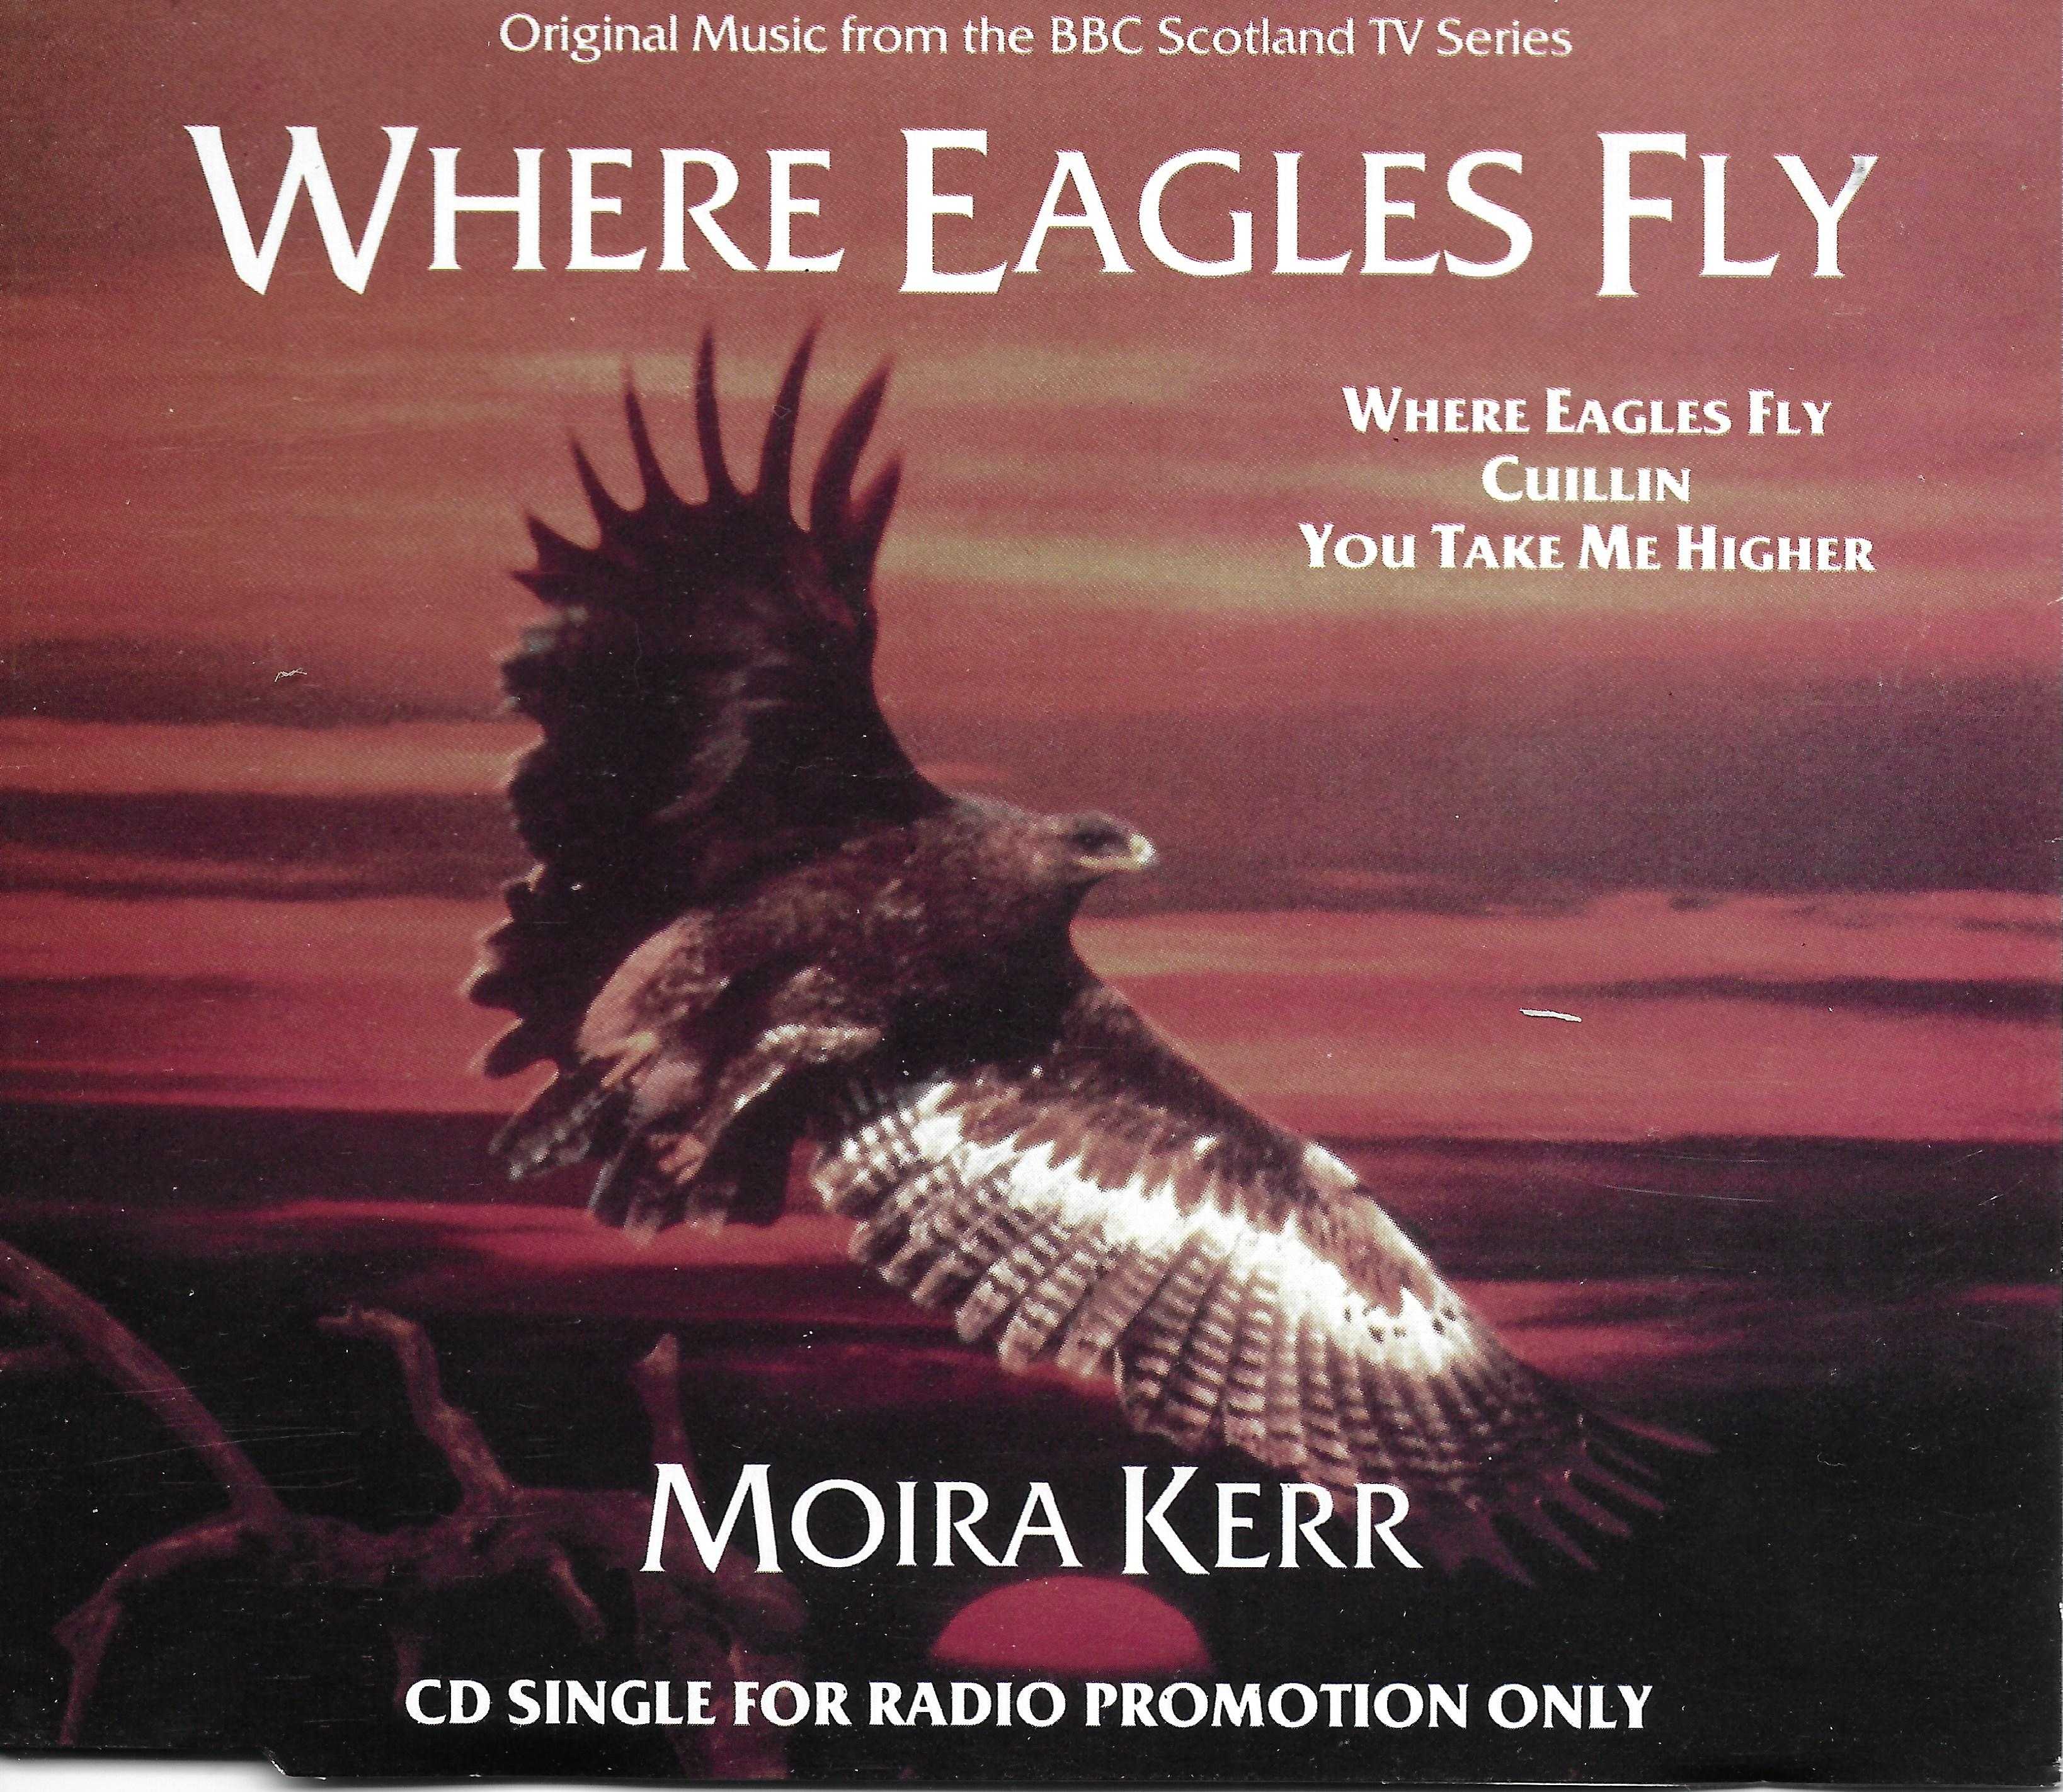 Picture of RAD CD 1 Where eagles fly - Promotional CDS by artist Moira Kerr from the BBC cdsingles - Records and Tapes library